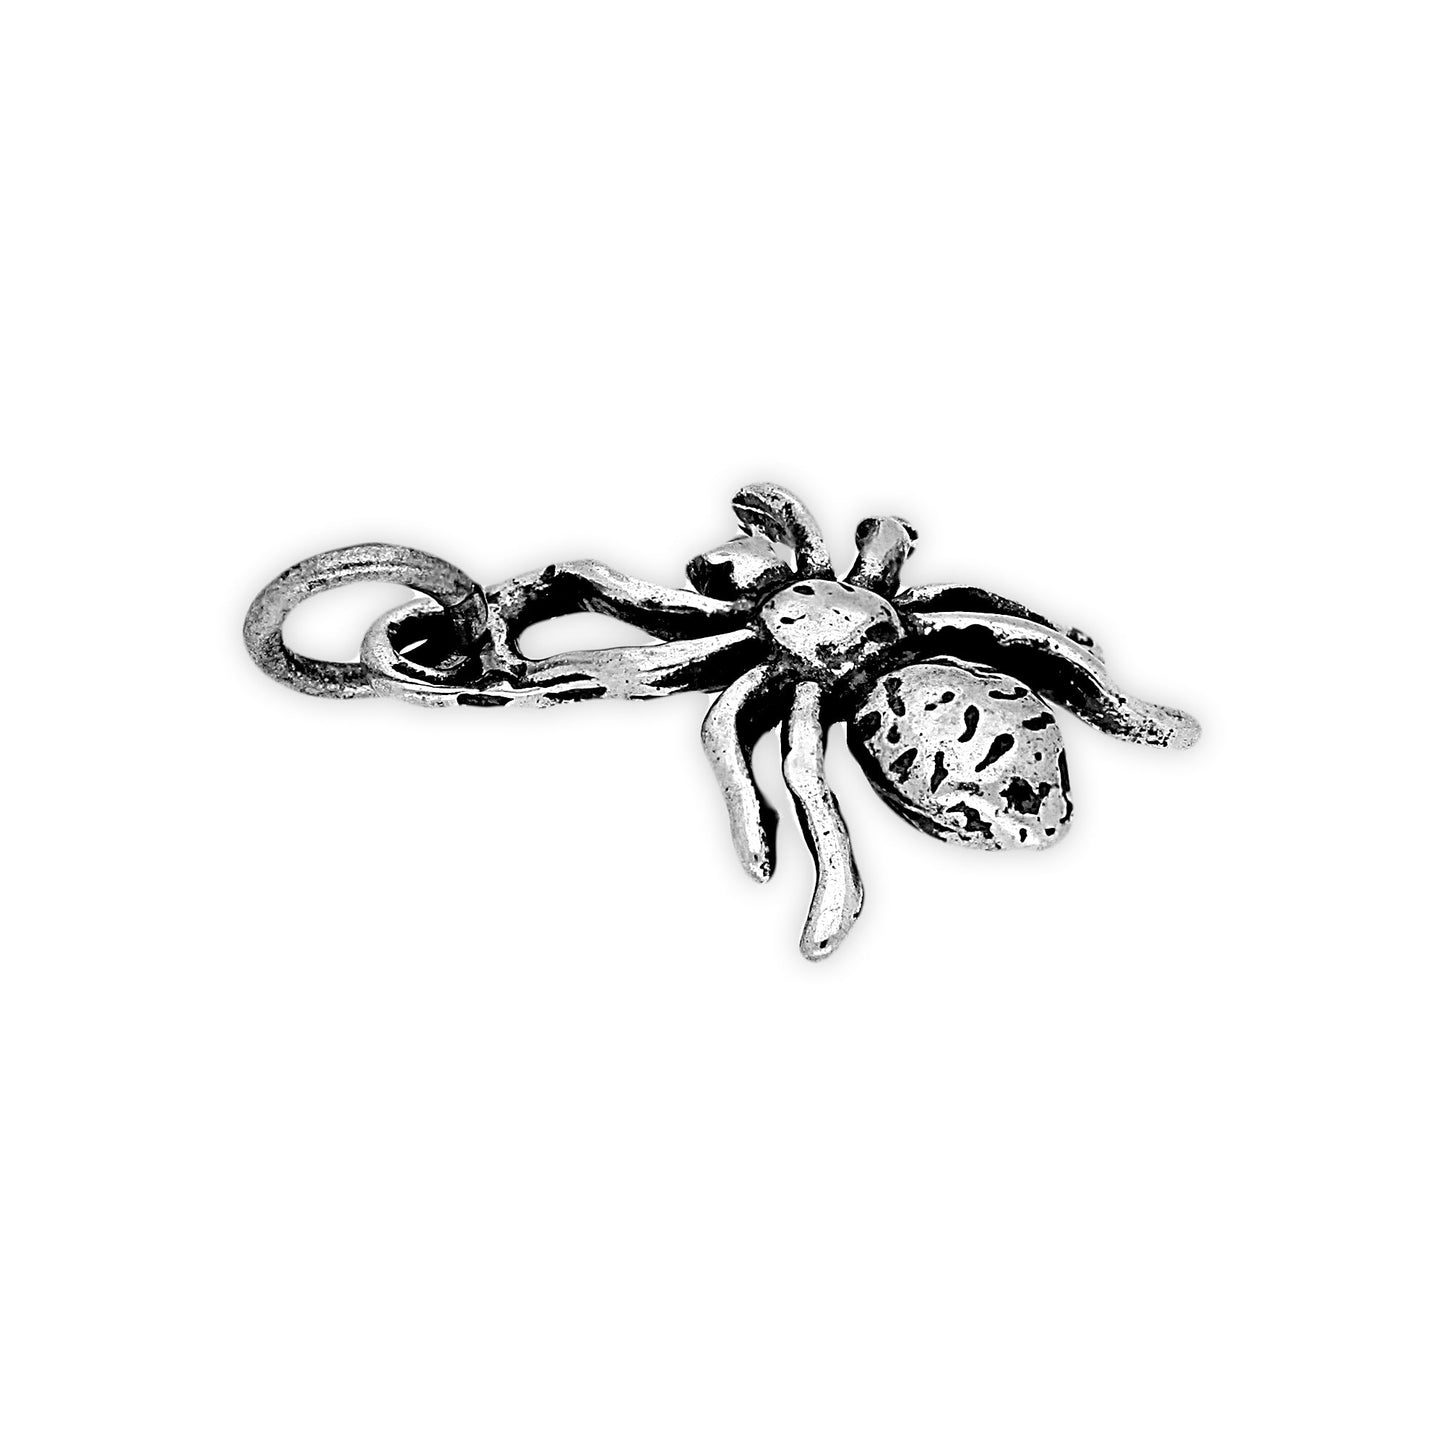 Sterling Silver Spider Charm